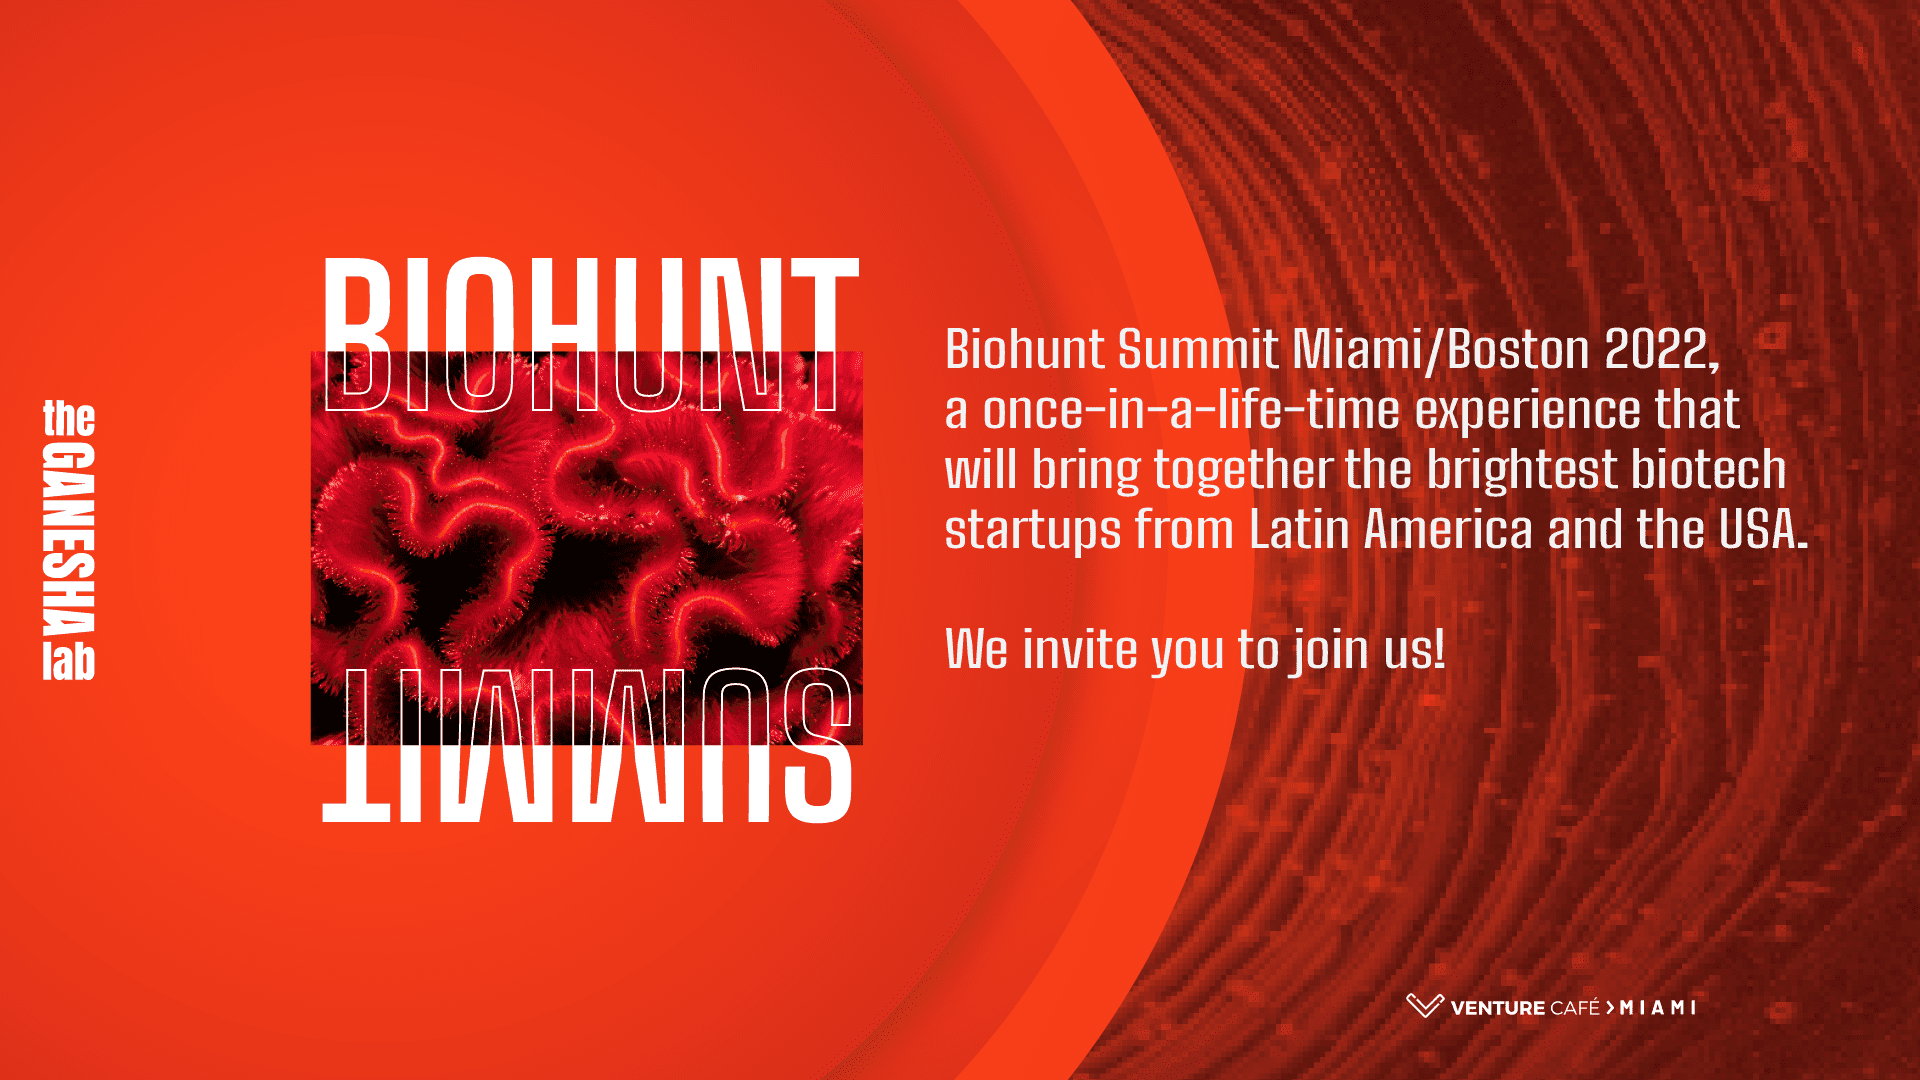 Biohunt Summit Miami/Boston 2022, a once-in-a-life-time experience that will bring together the brightest biotech startups from Latin America and the USA. We invite you to join us!